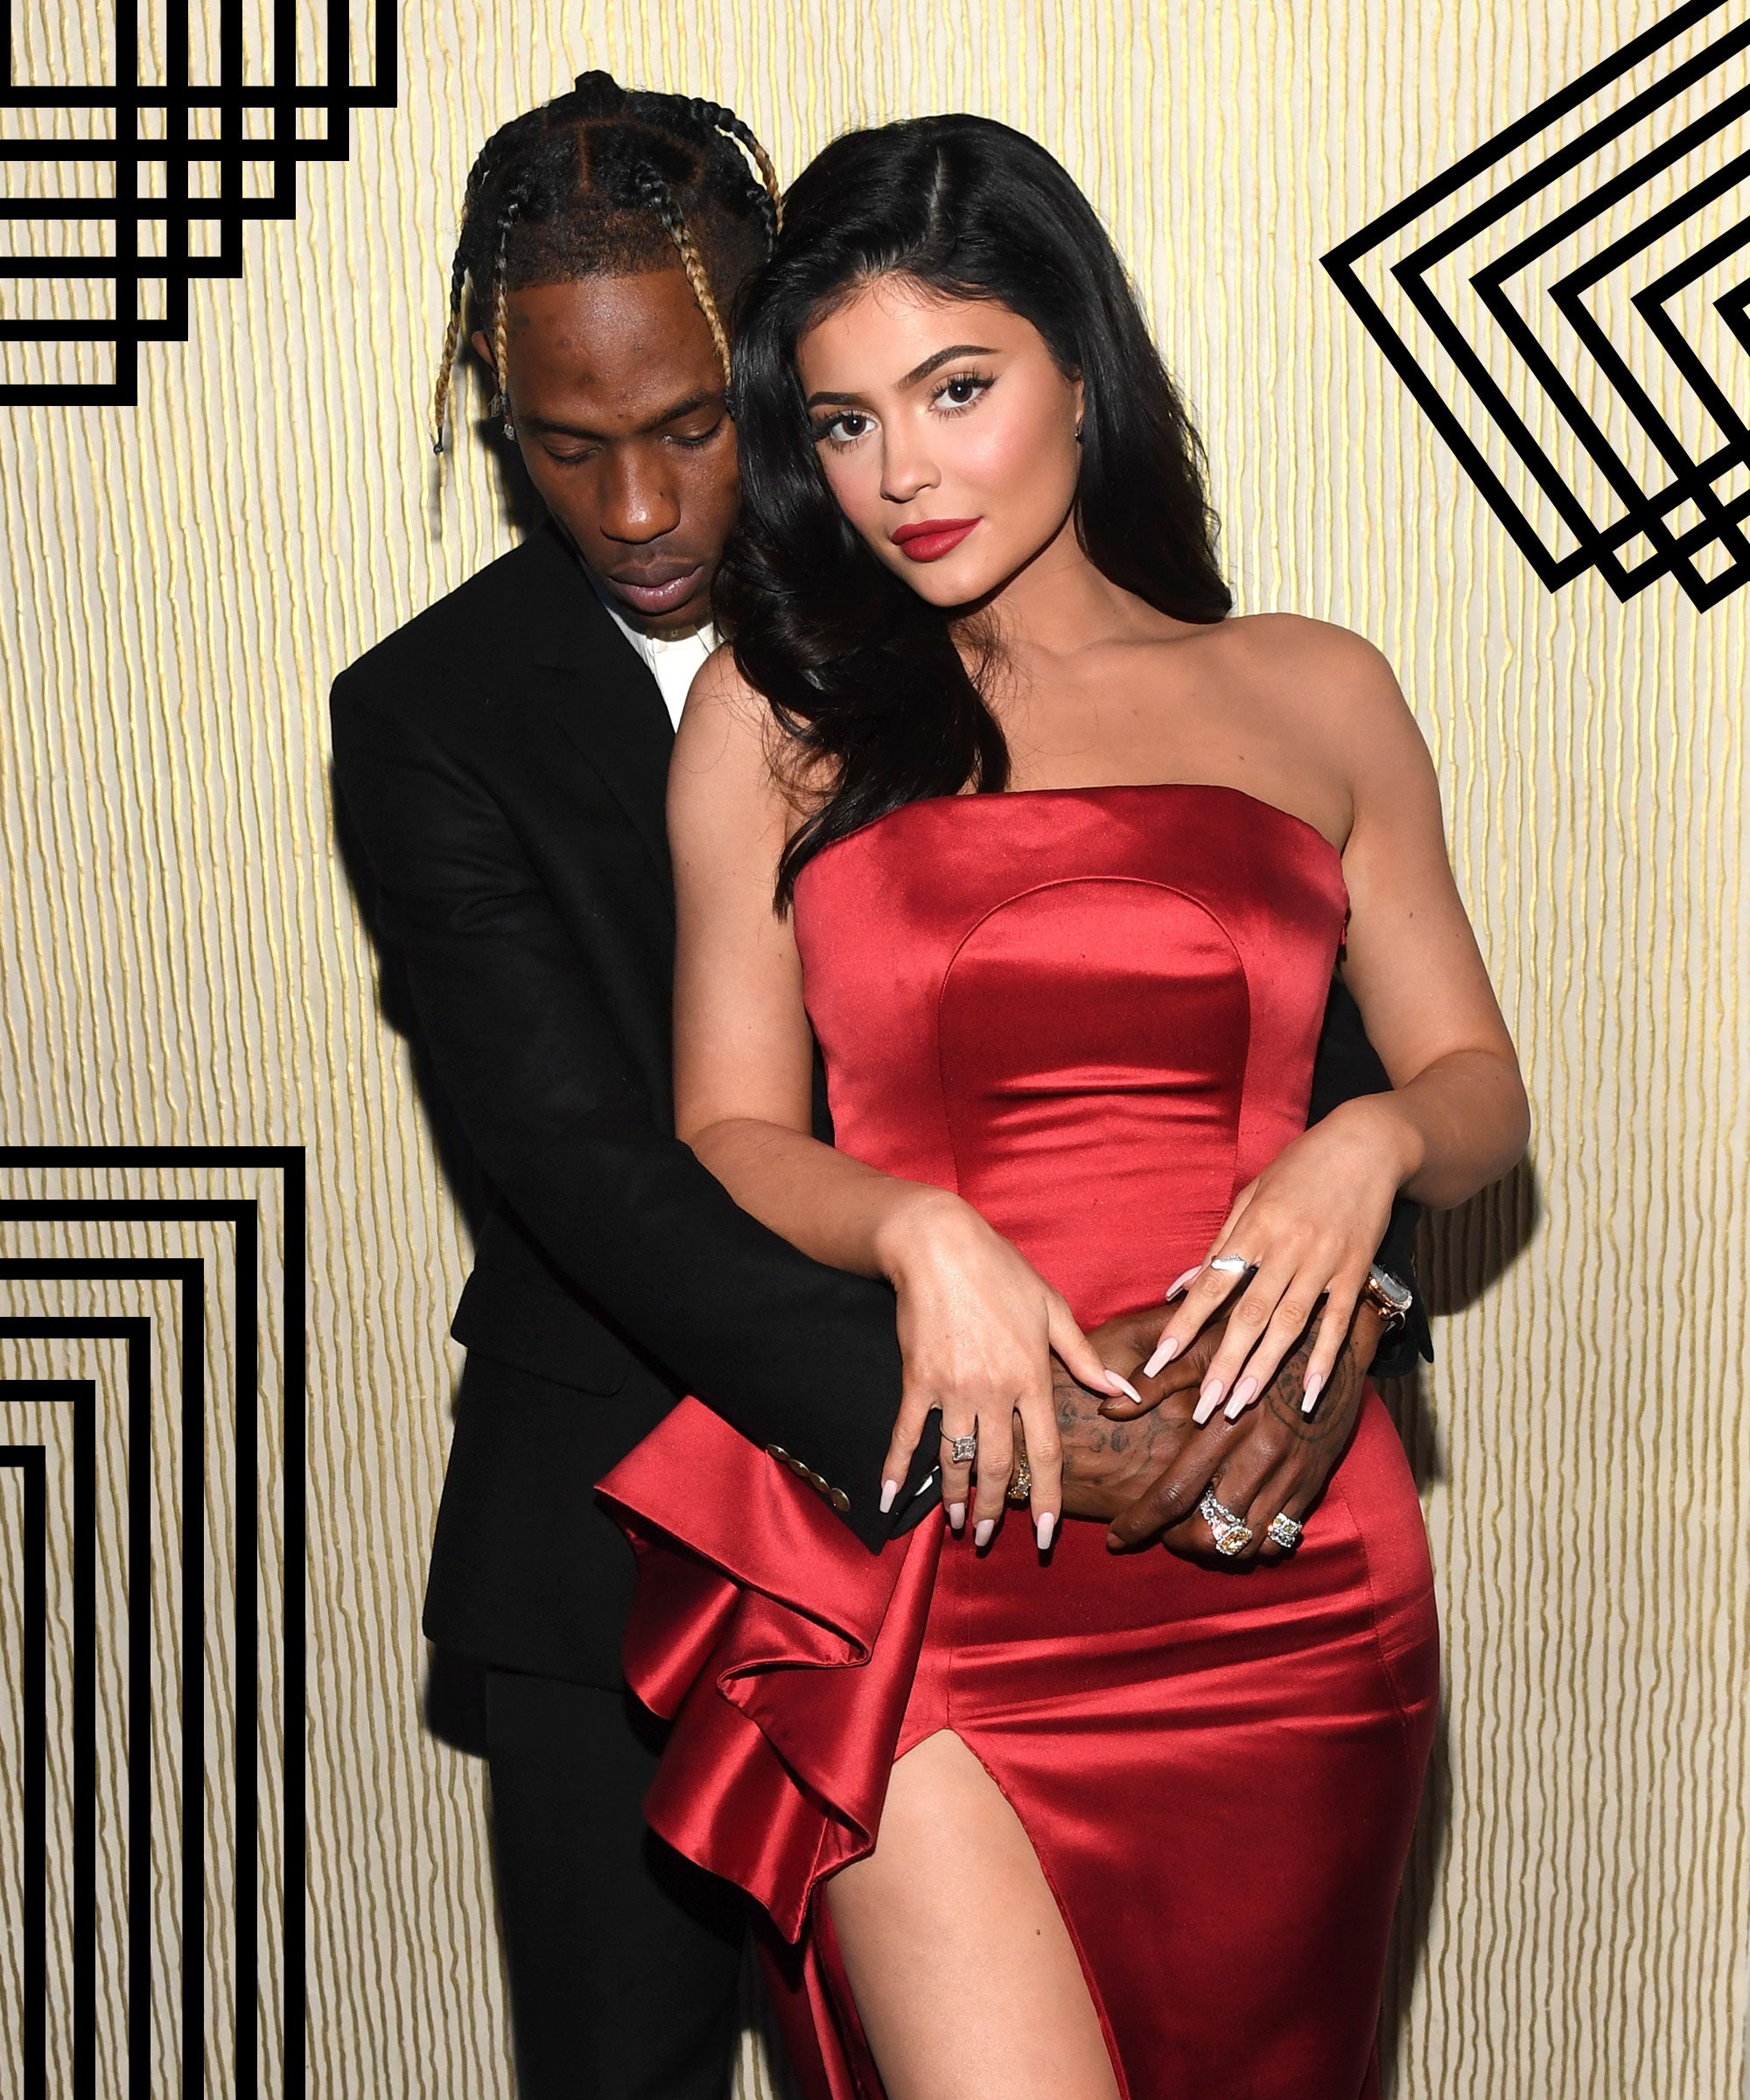 Travis Scott and ASAP Rocky are dating the Jenner sisters!